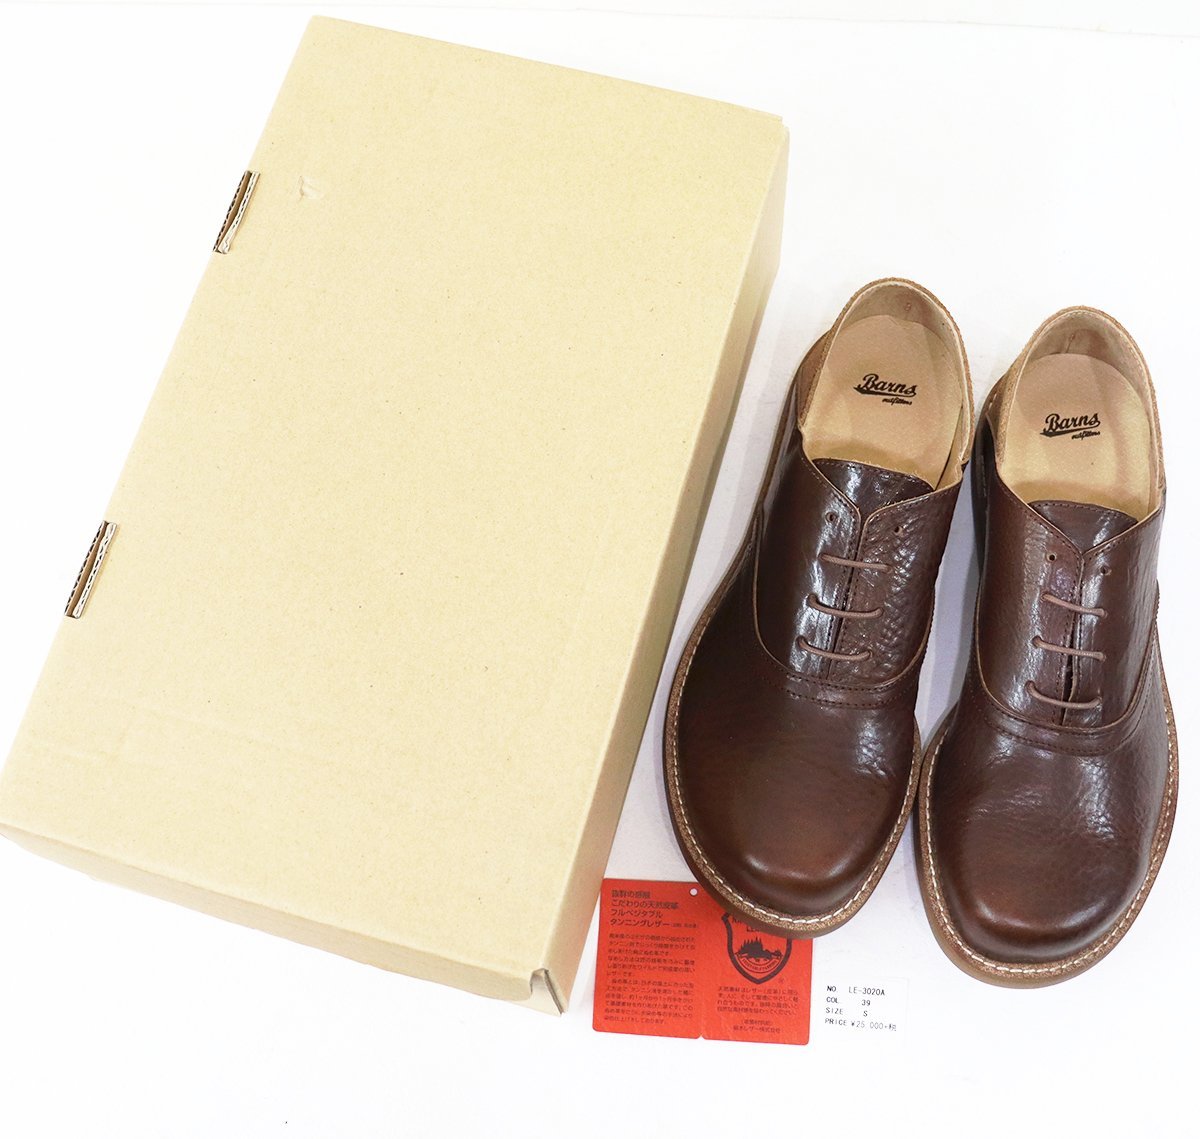 BARNS OUTFITTERS (バーンズアウトフィッターズ) LEATHER SLIP-ON / 栃木レザースリッポン シューズ LE-3020A 未使用品 チョコ size 26cm